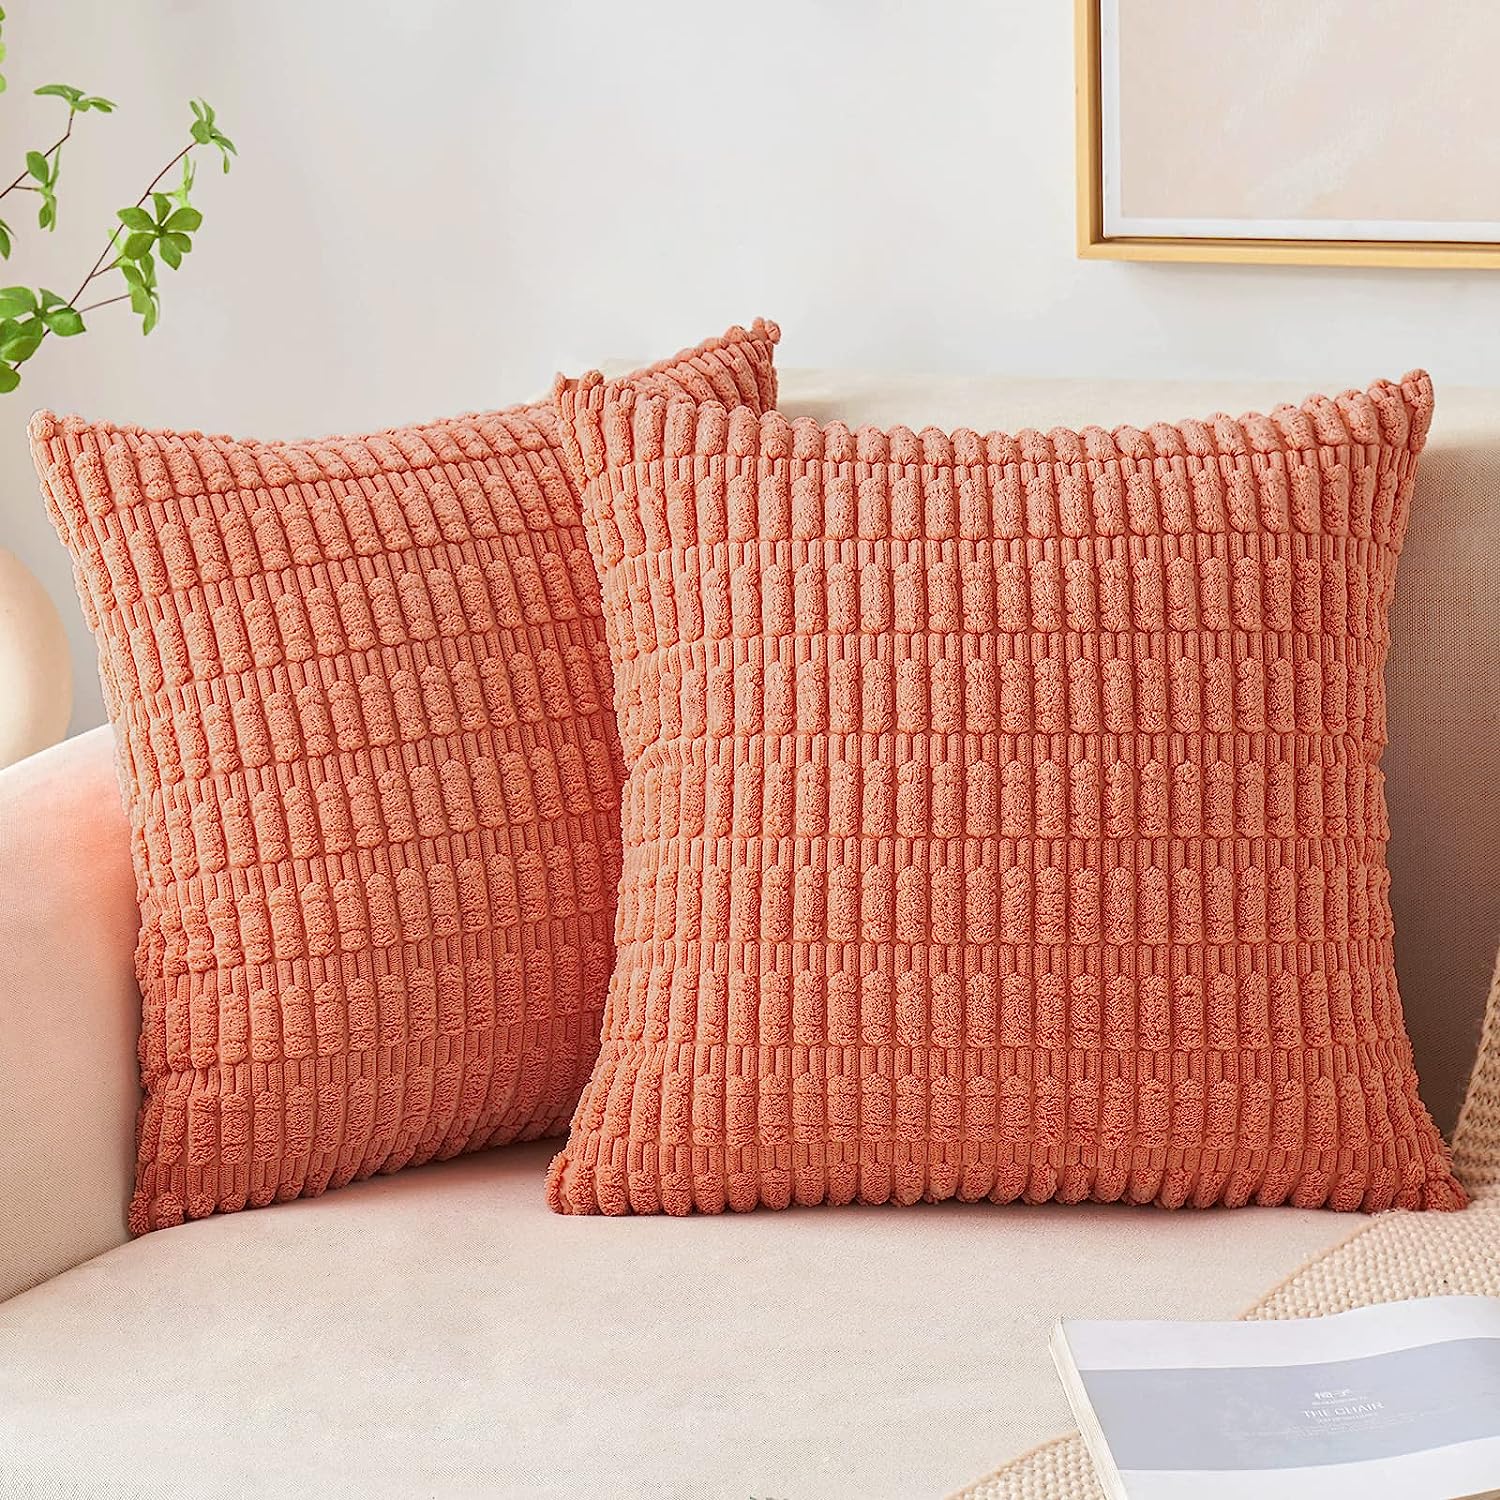 BeBen Throw Pillow Covers - Set of 2 Pillow Covers 18x18, Decorative Euro  Pillow Covers Corn Striped, Soft Corduroy Cushion Case, Home Decor for